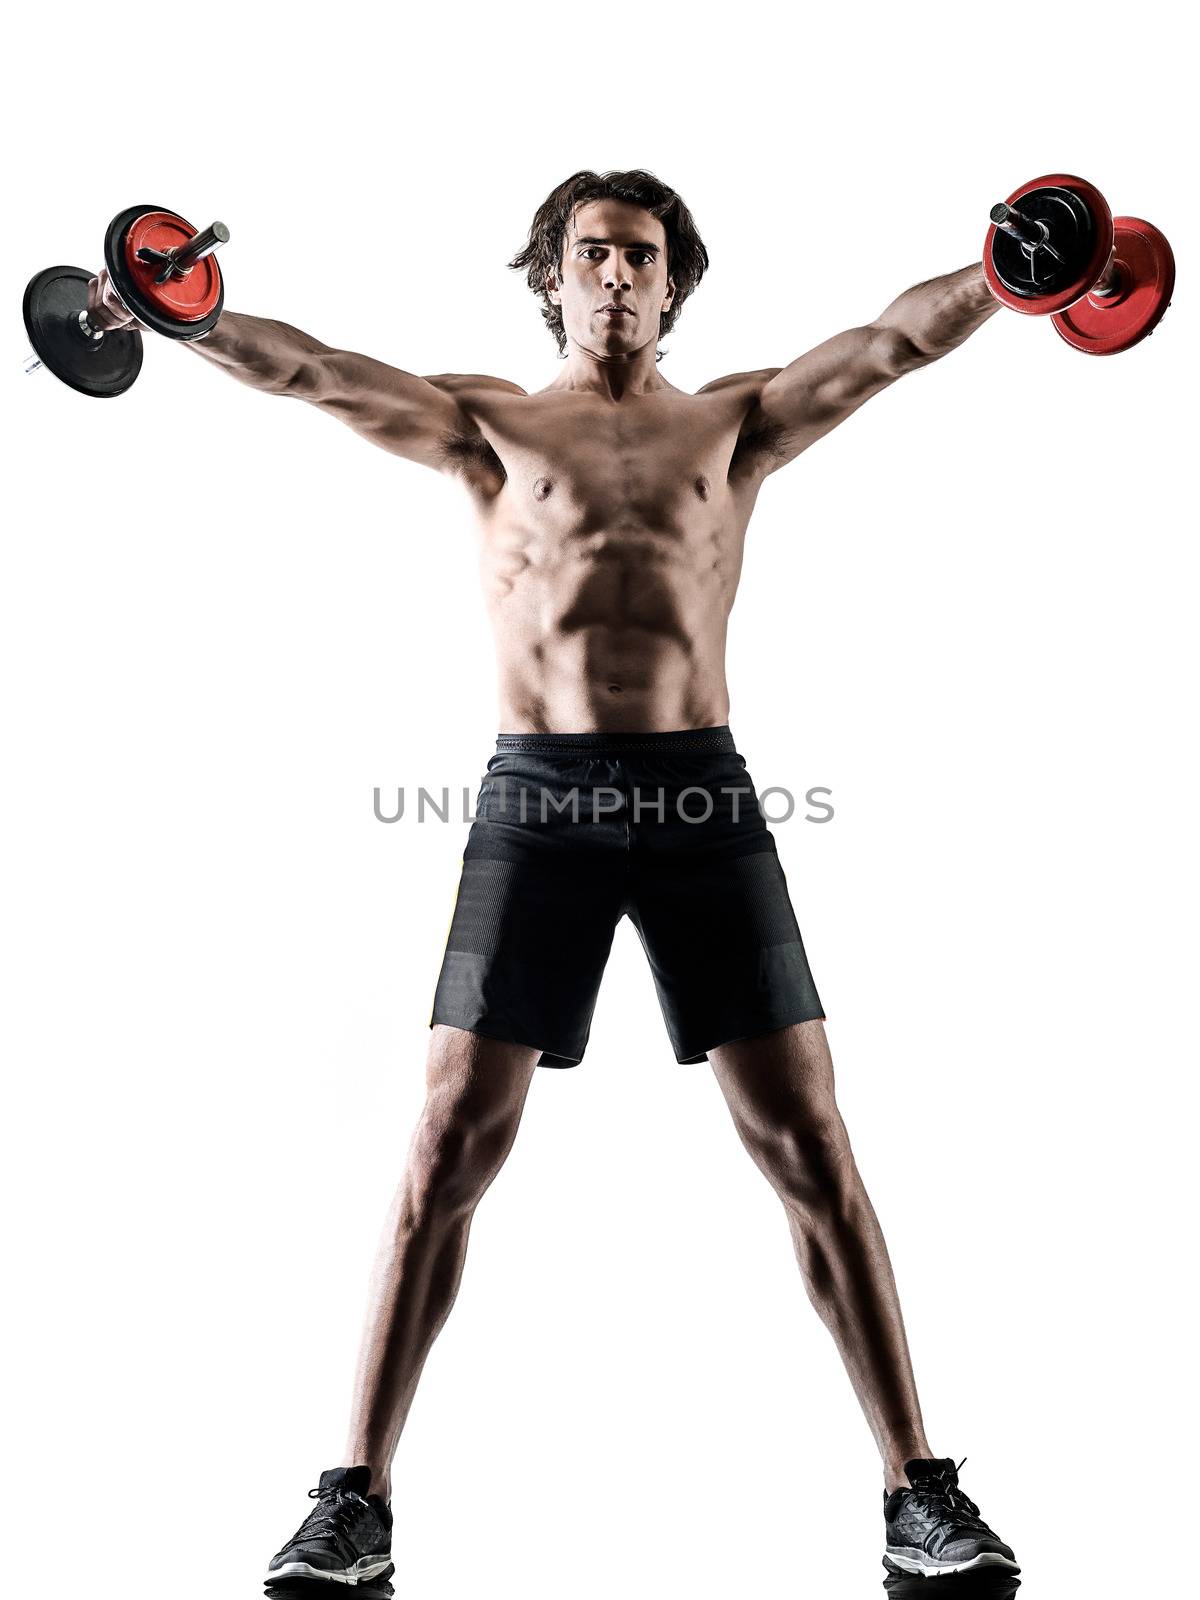 one caucasian man fitness weitghs training exercises studio in silhouette isolated on white background